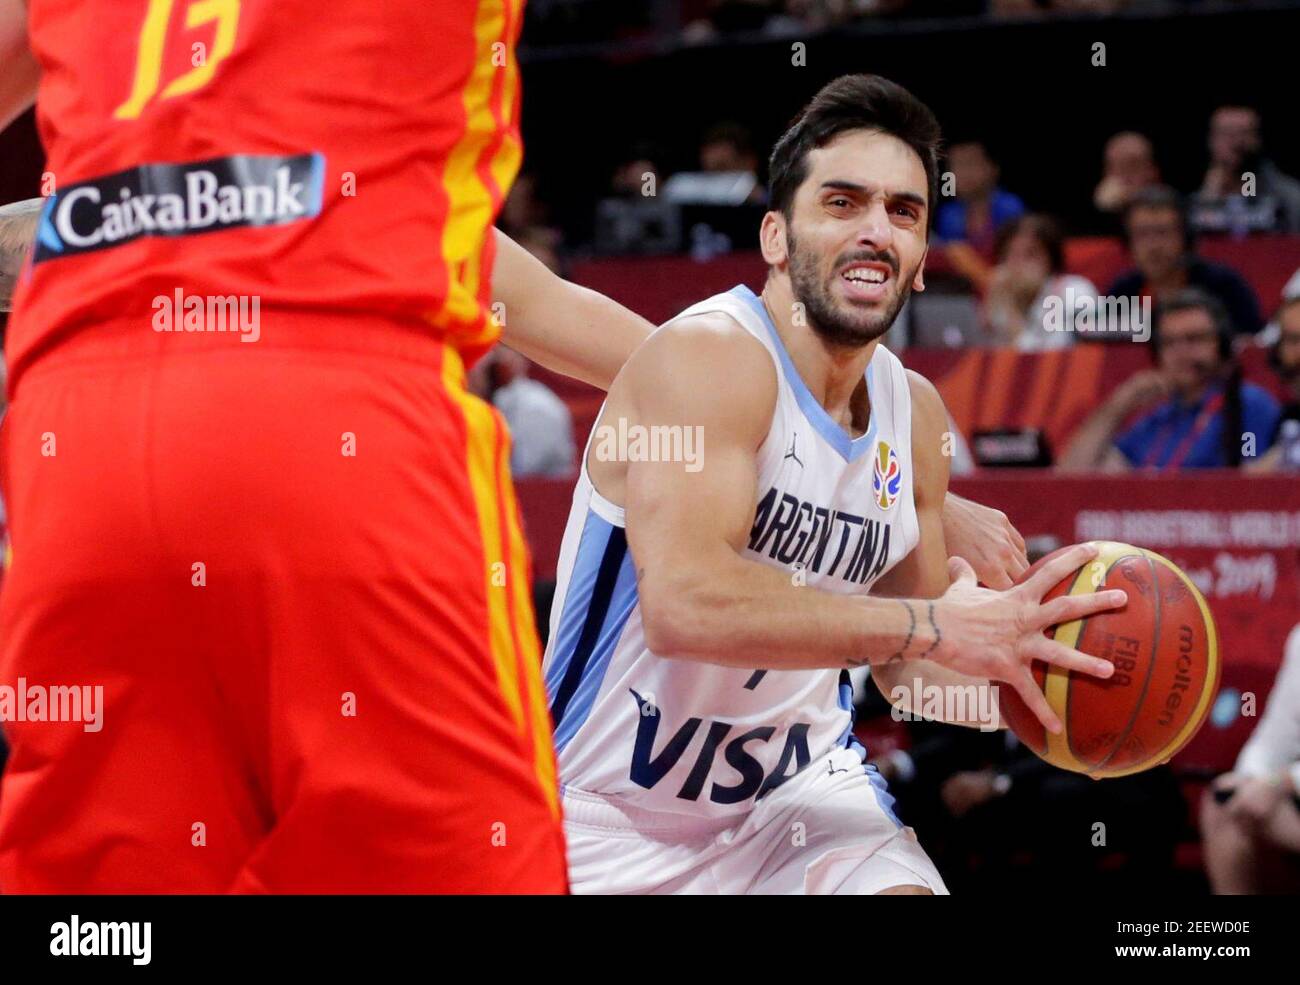 Basketball - FIBA World Cup - Final - Argentina v Spain - Wukesong Sport Arena, Beijing, China - September 15, 2019  Argentina's Facundo Campazzo in action   REUTERS/Jason Lee Stock Photo